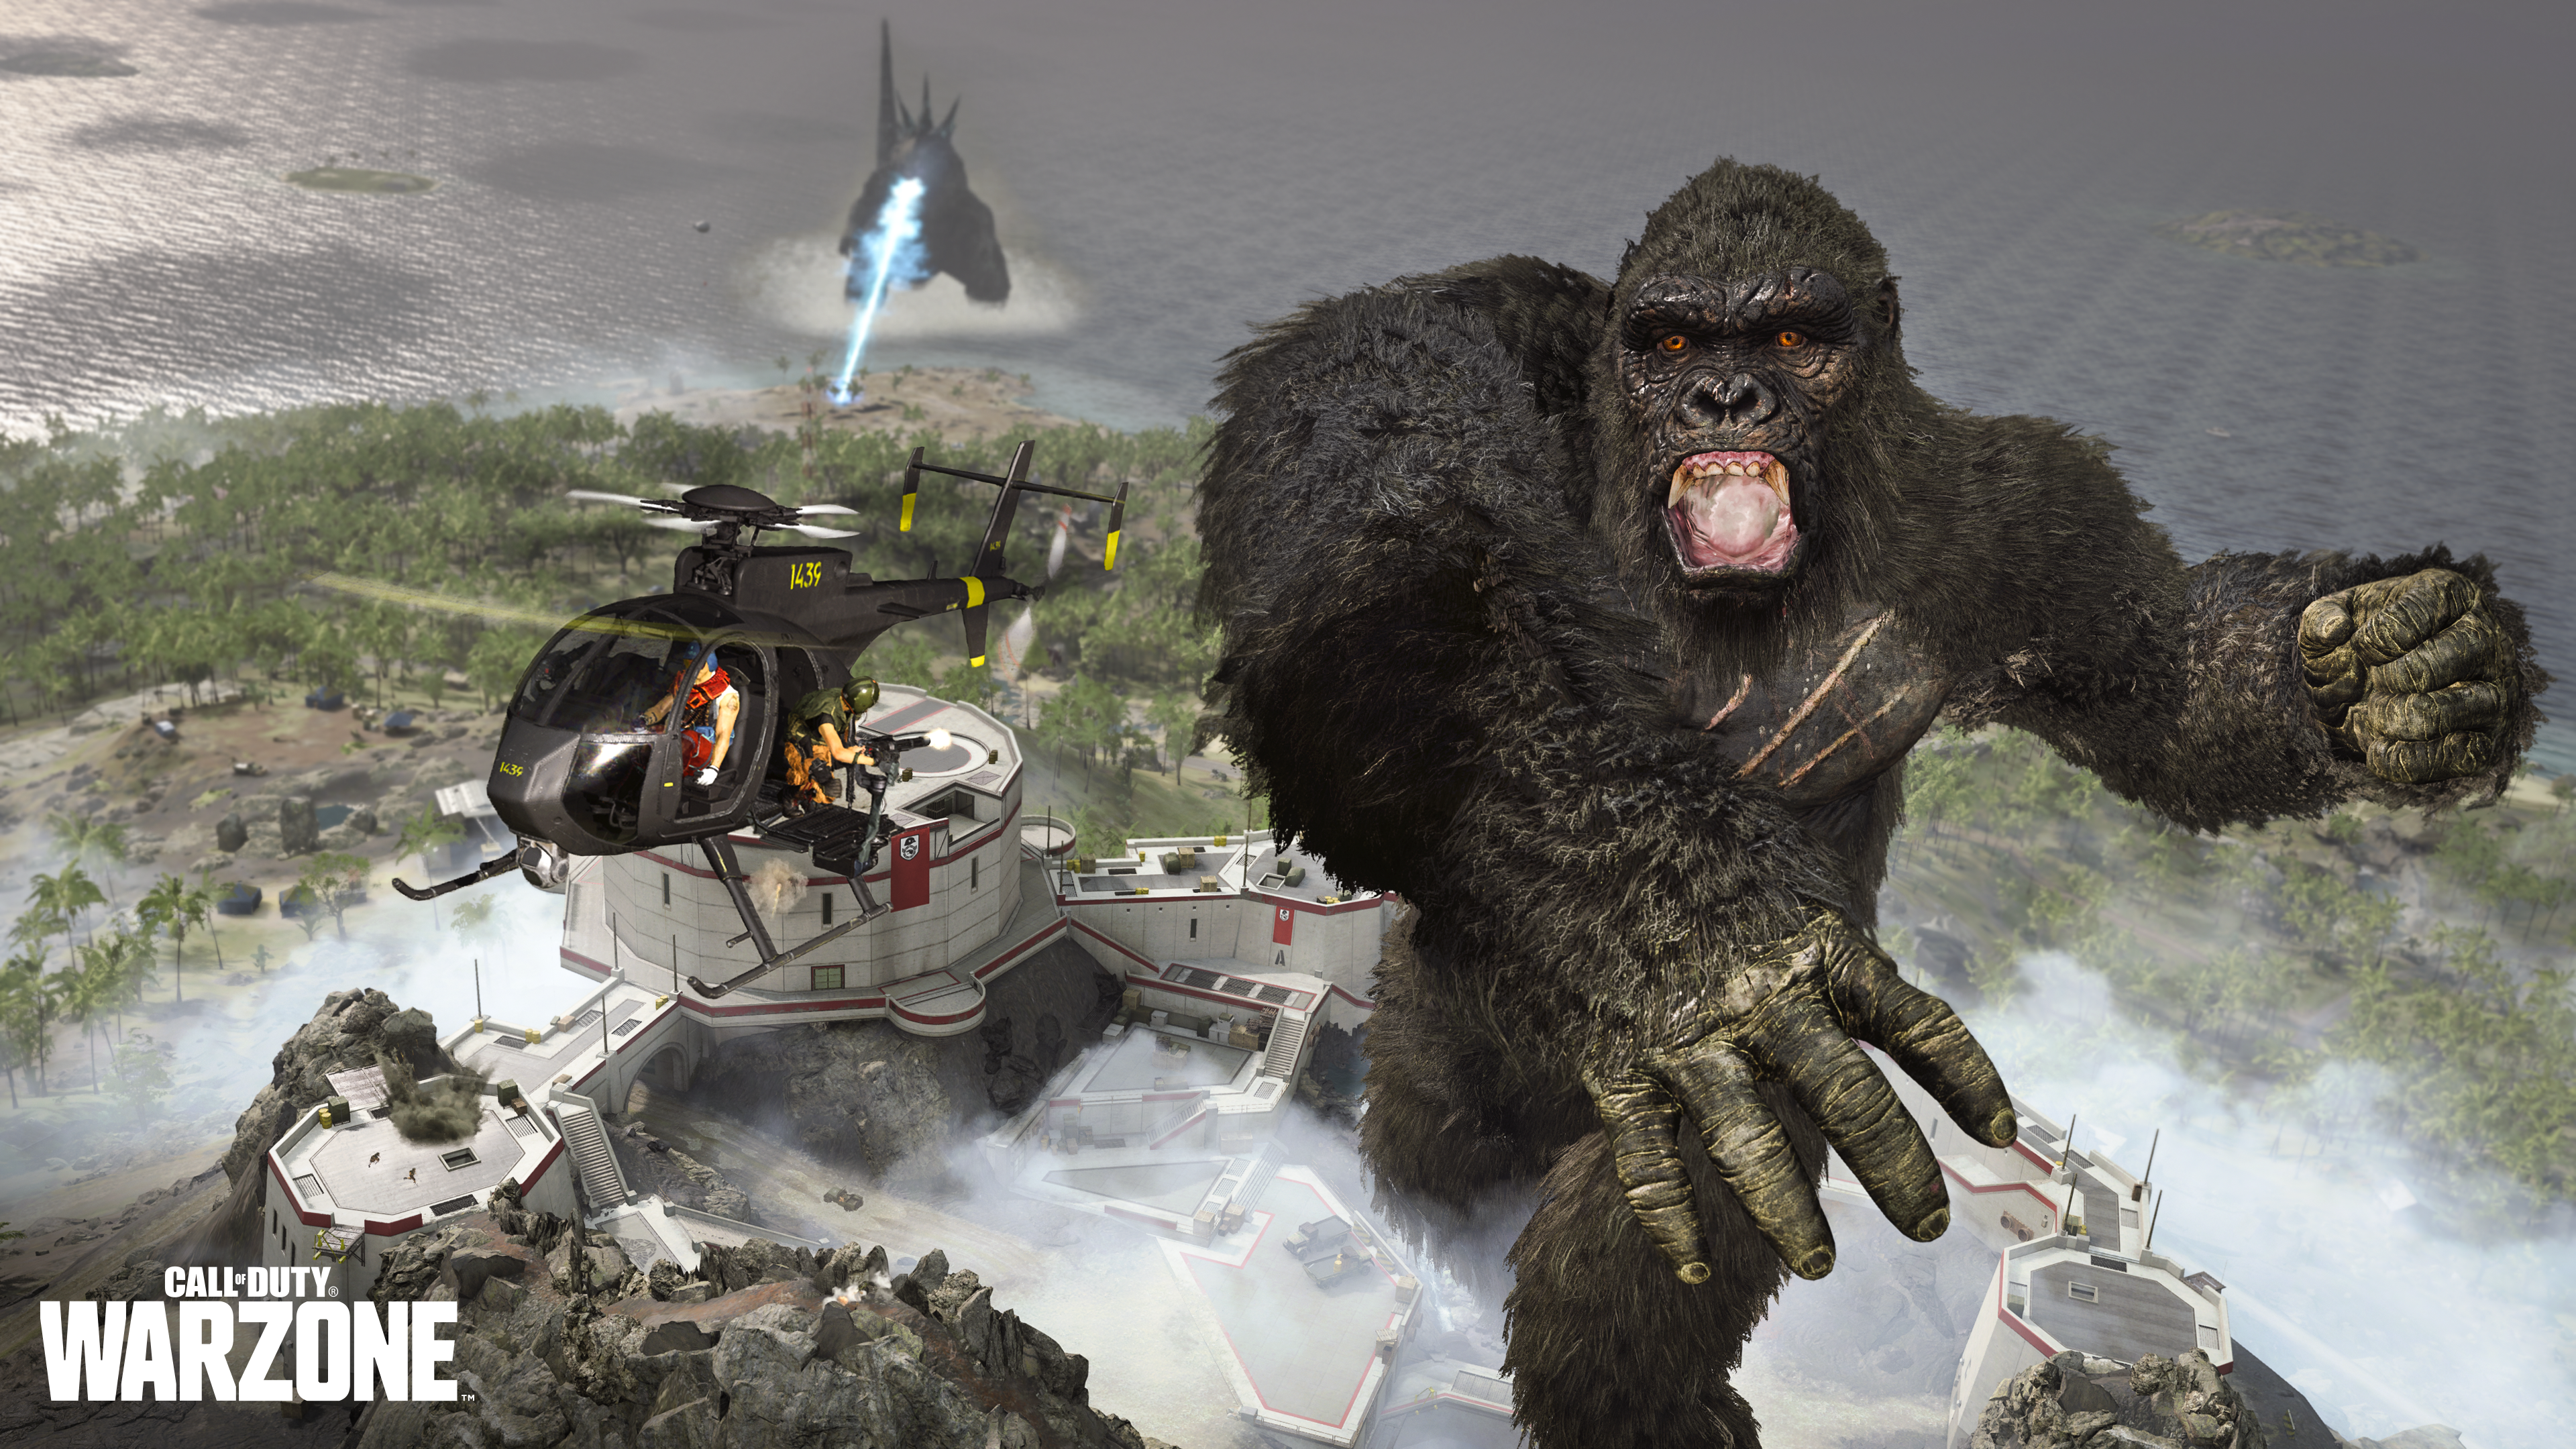 Kong_helicopter_fight_2